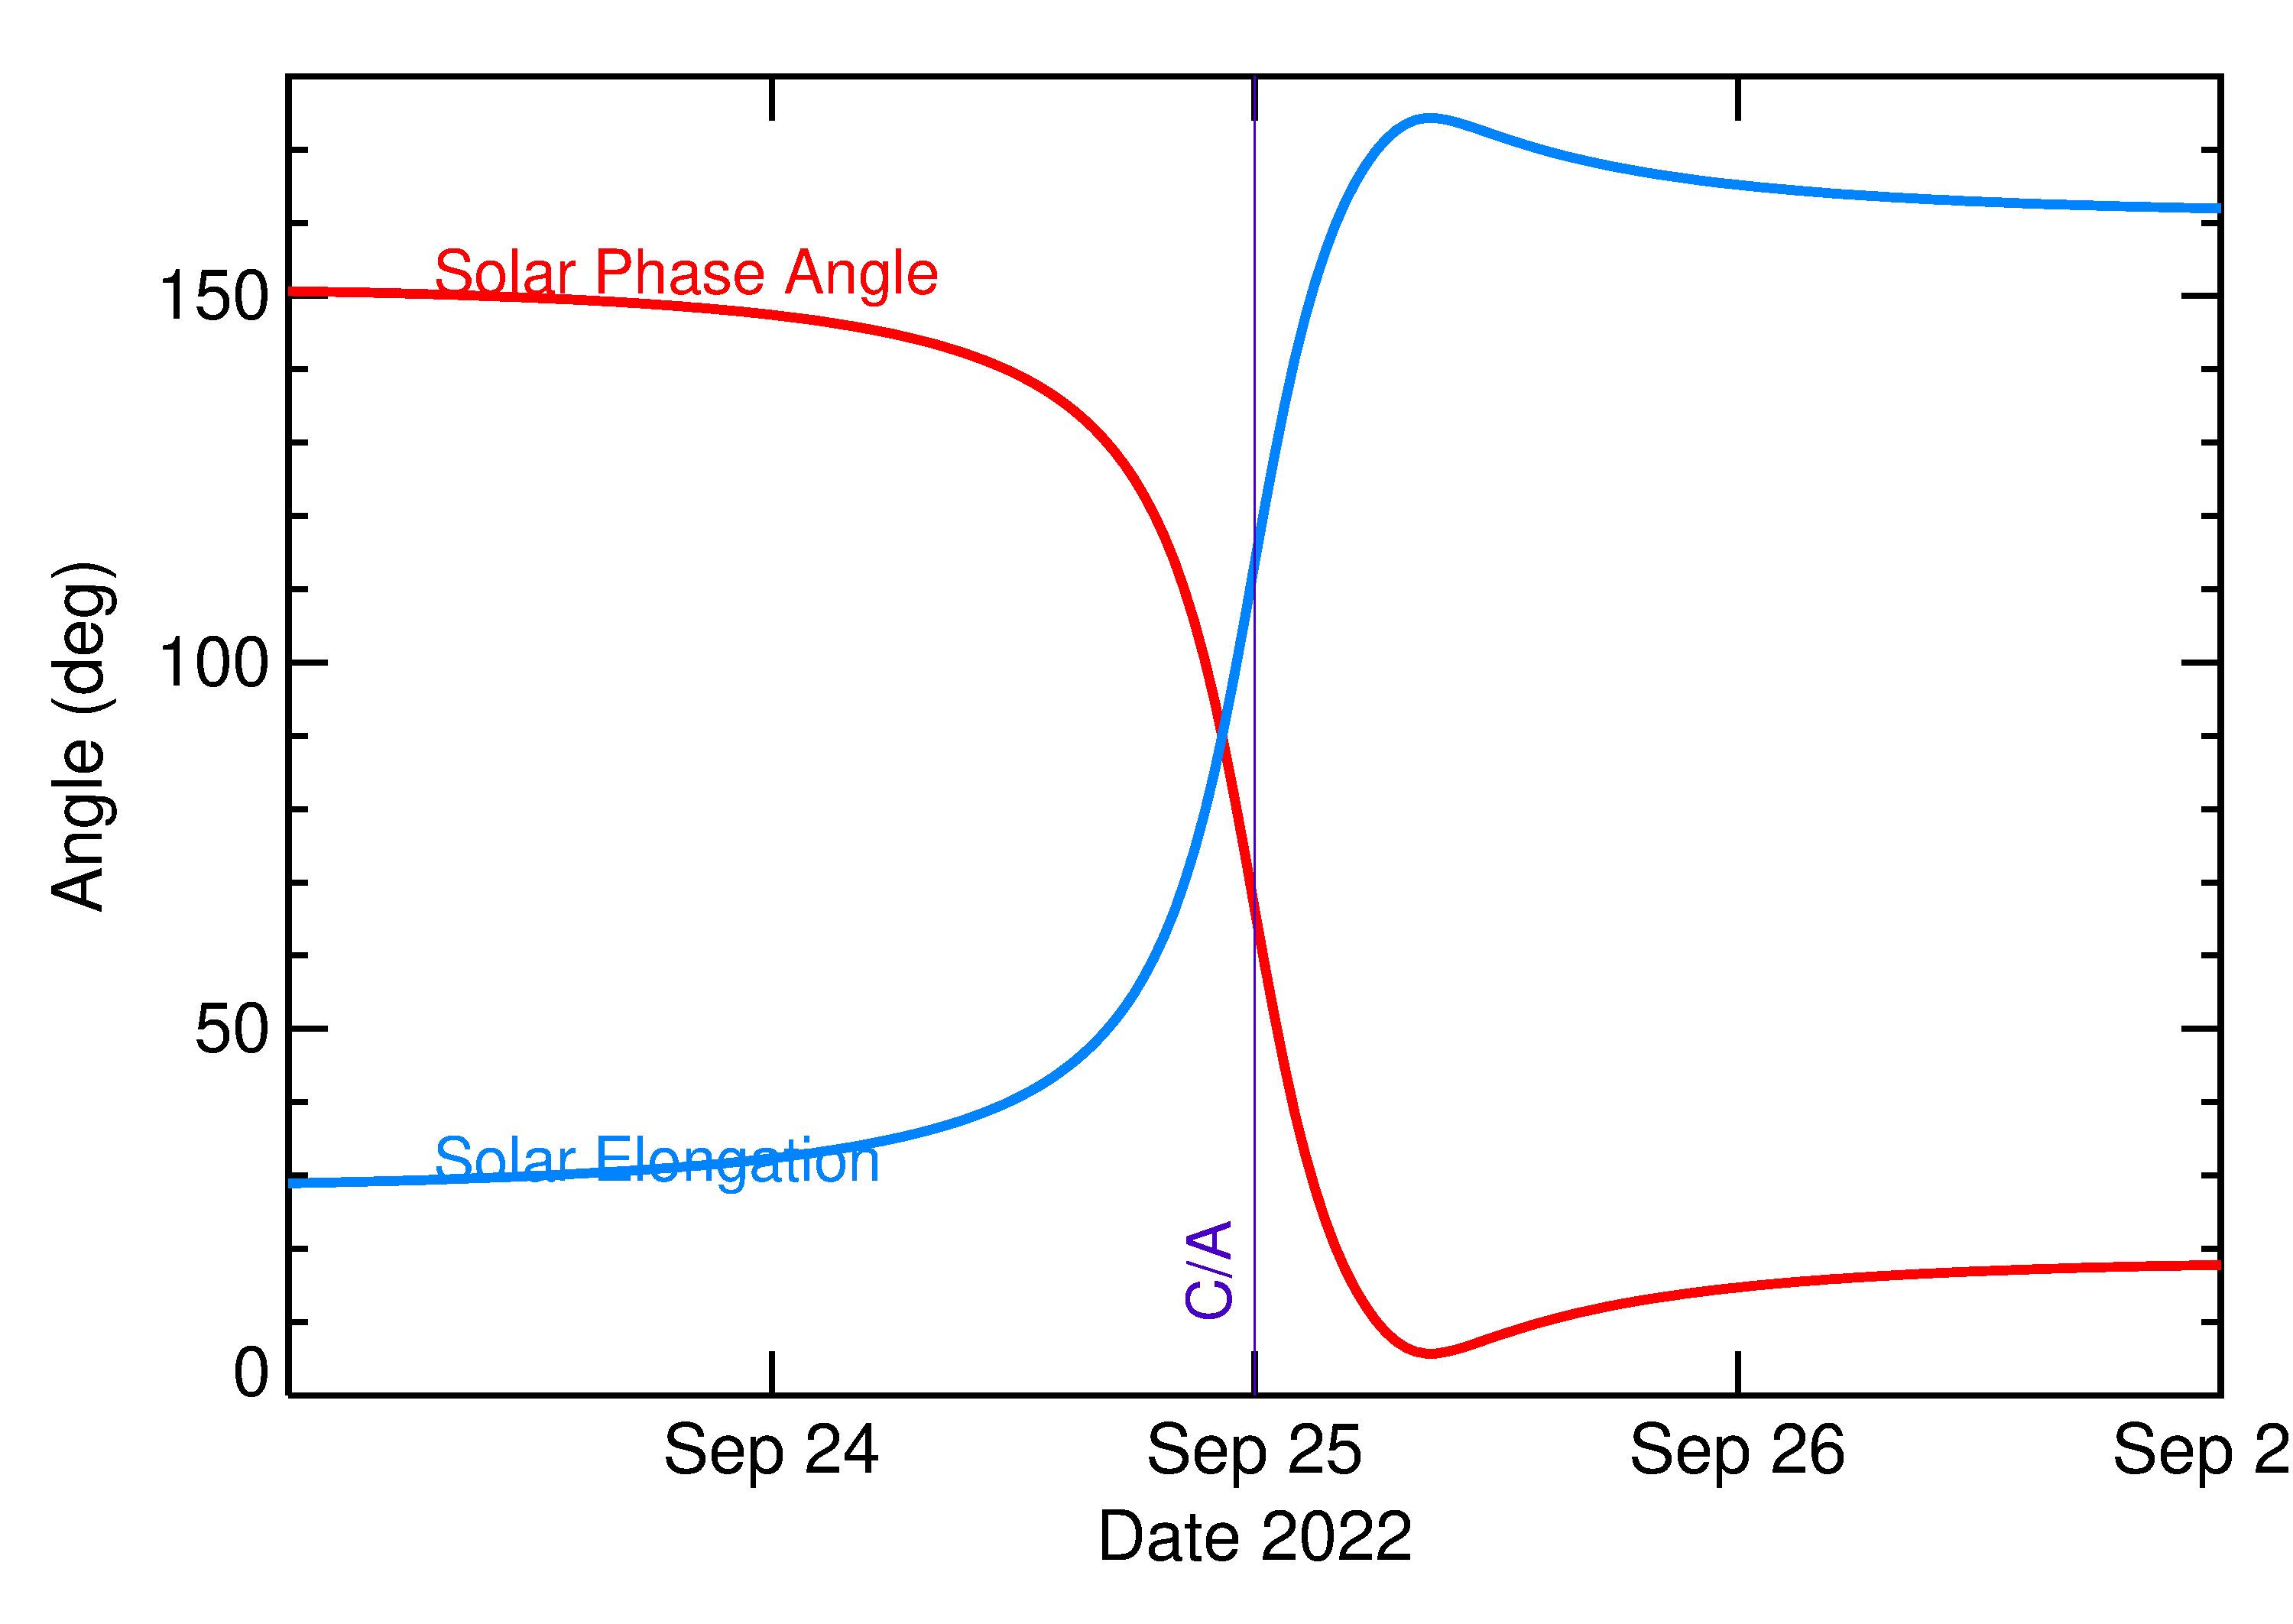 Solar Elongation and Solar Phase Angle of 2022 SF19 in the days around closest approach